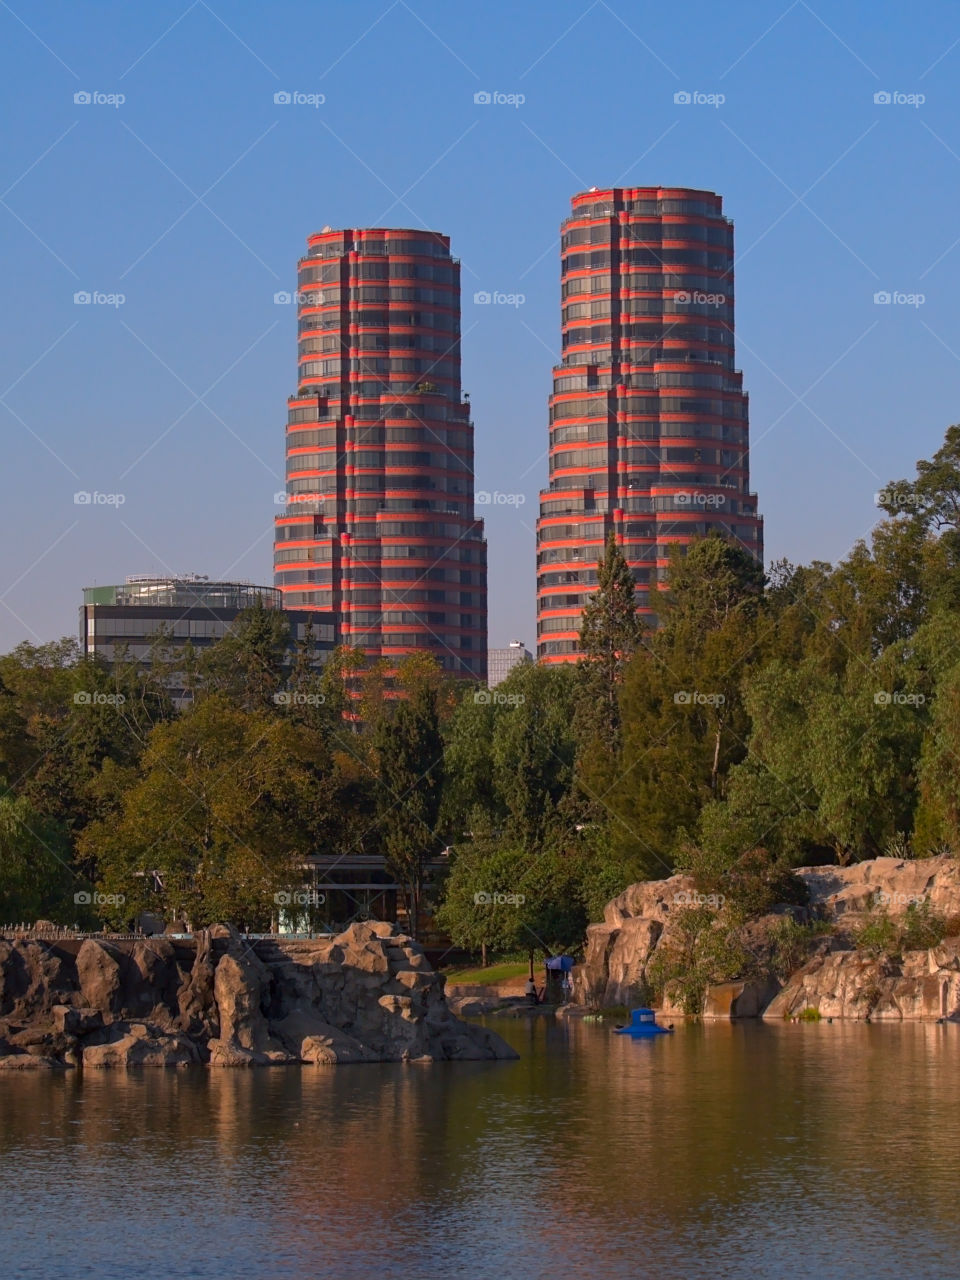 View of the residential towers "Residencial del Bosque" and the main lake in Chapultepec Park in Mexico City, Mexico